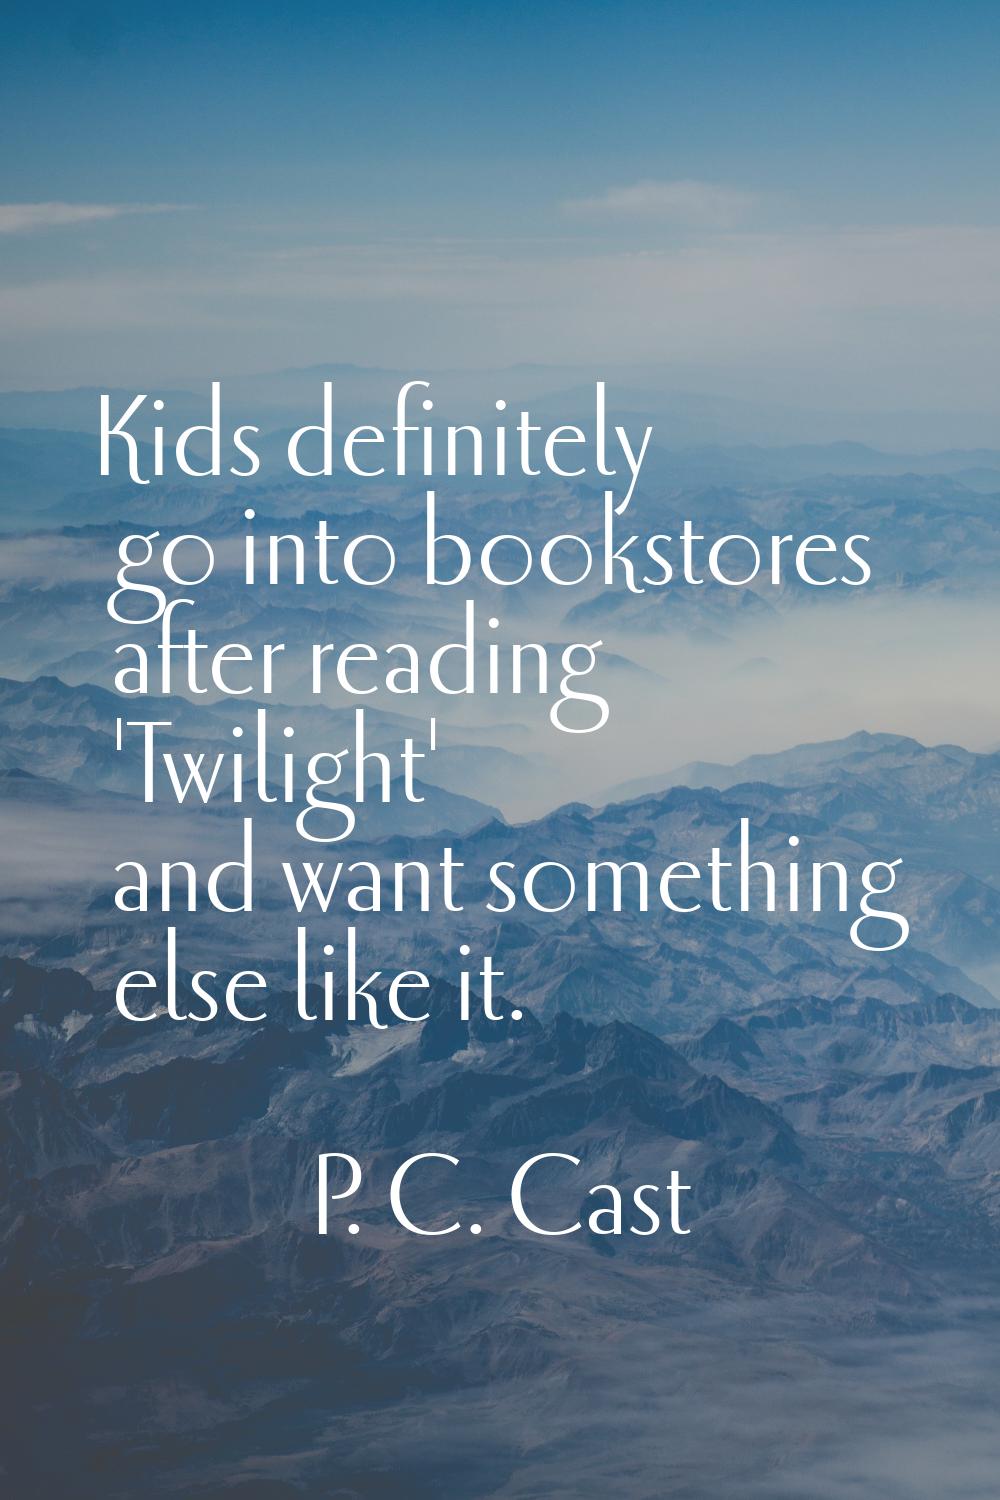 Kids definitely go into bookstores after reading 'Twilight' and want something else like it.